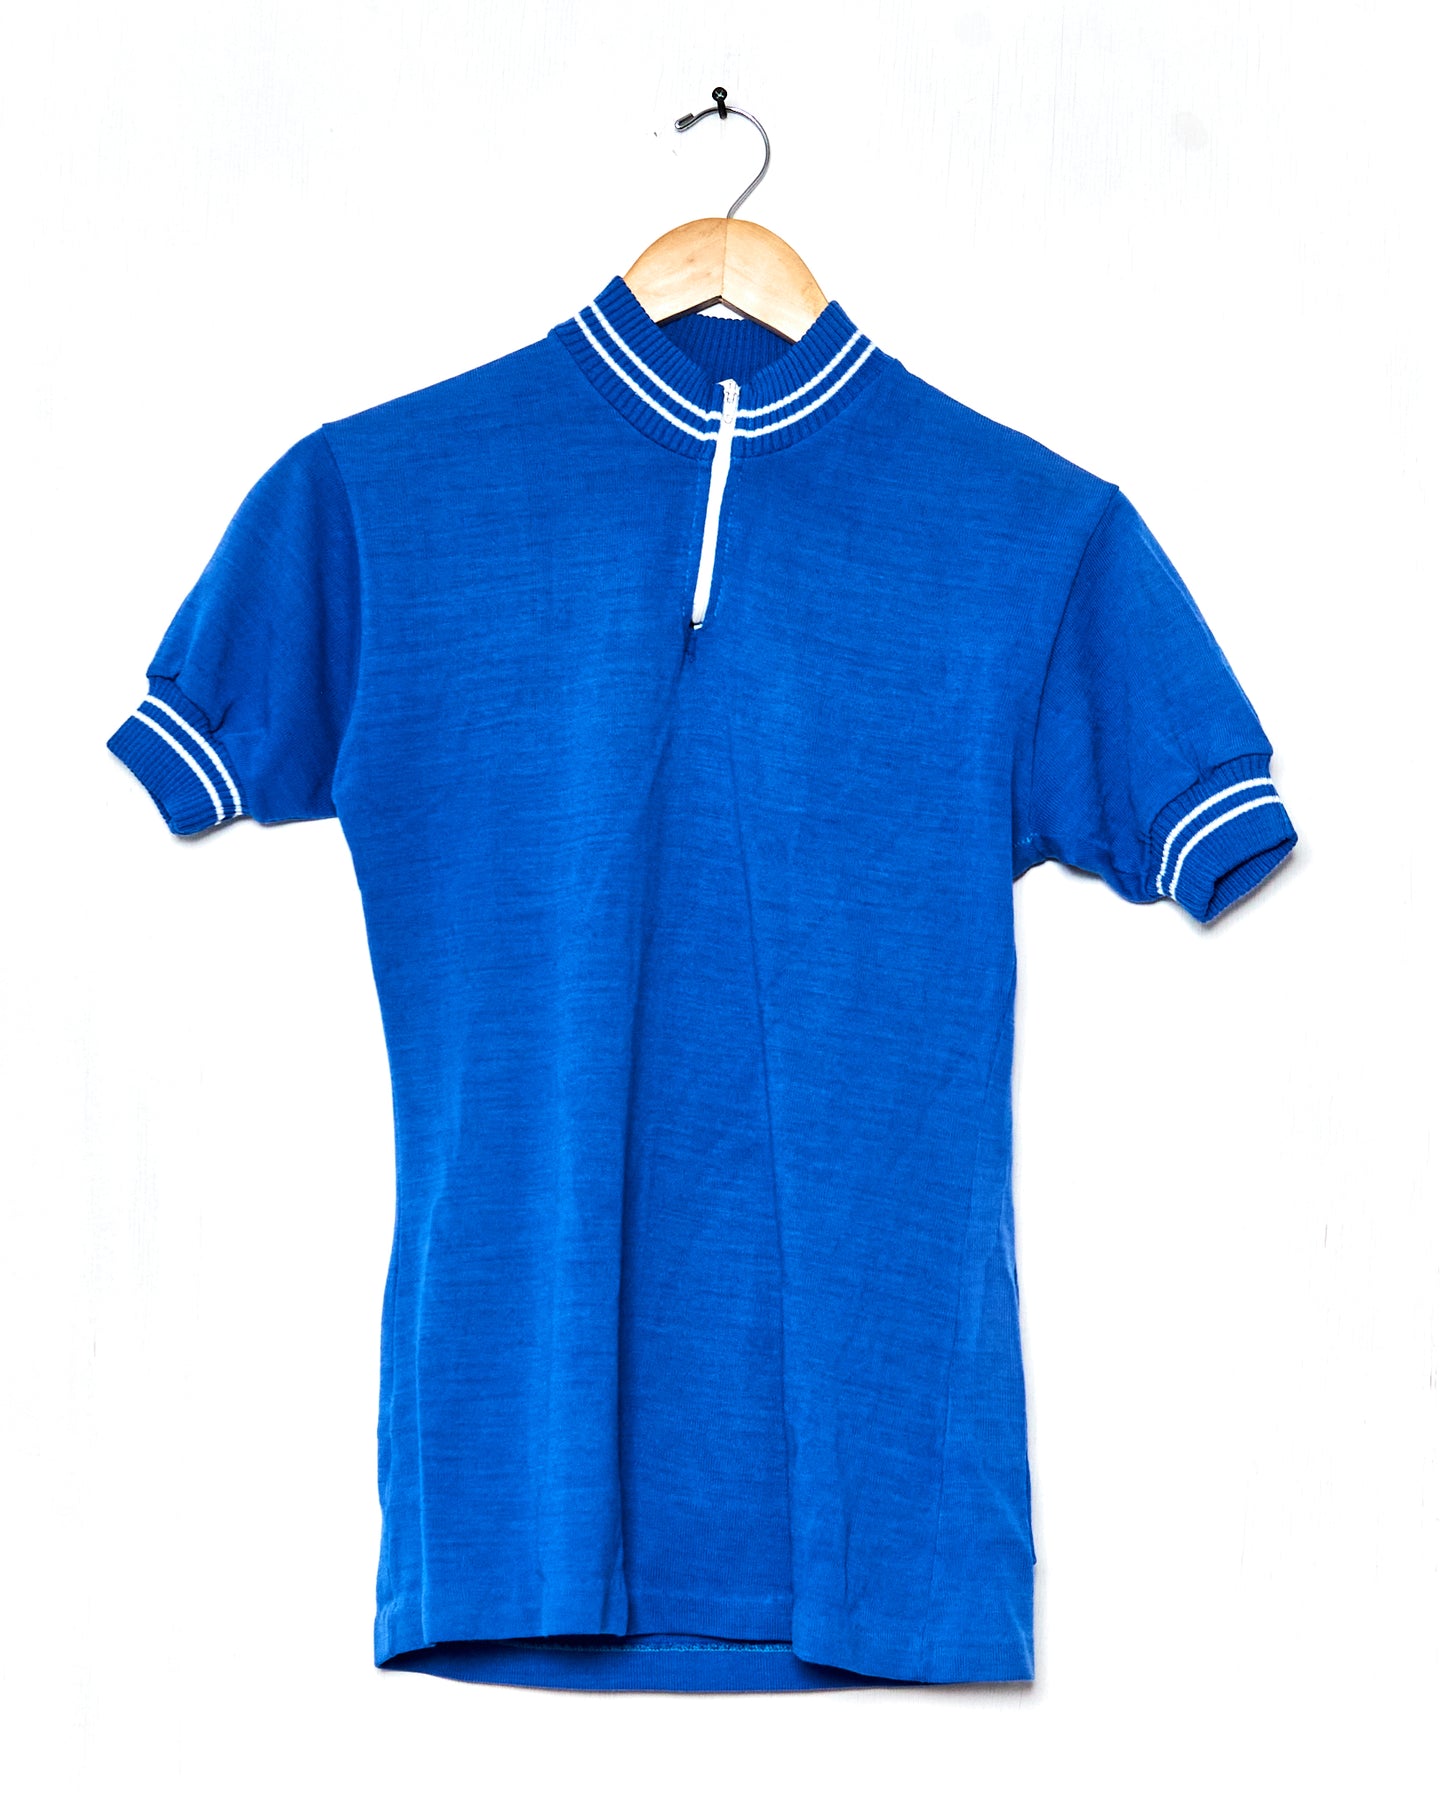 1970s Bachelier Cycling Top